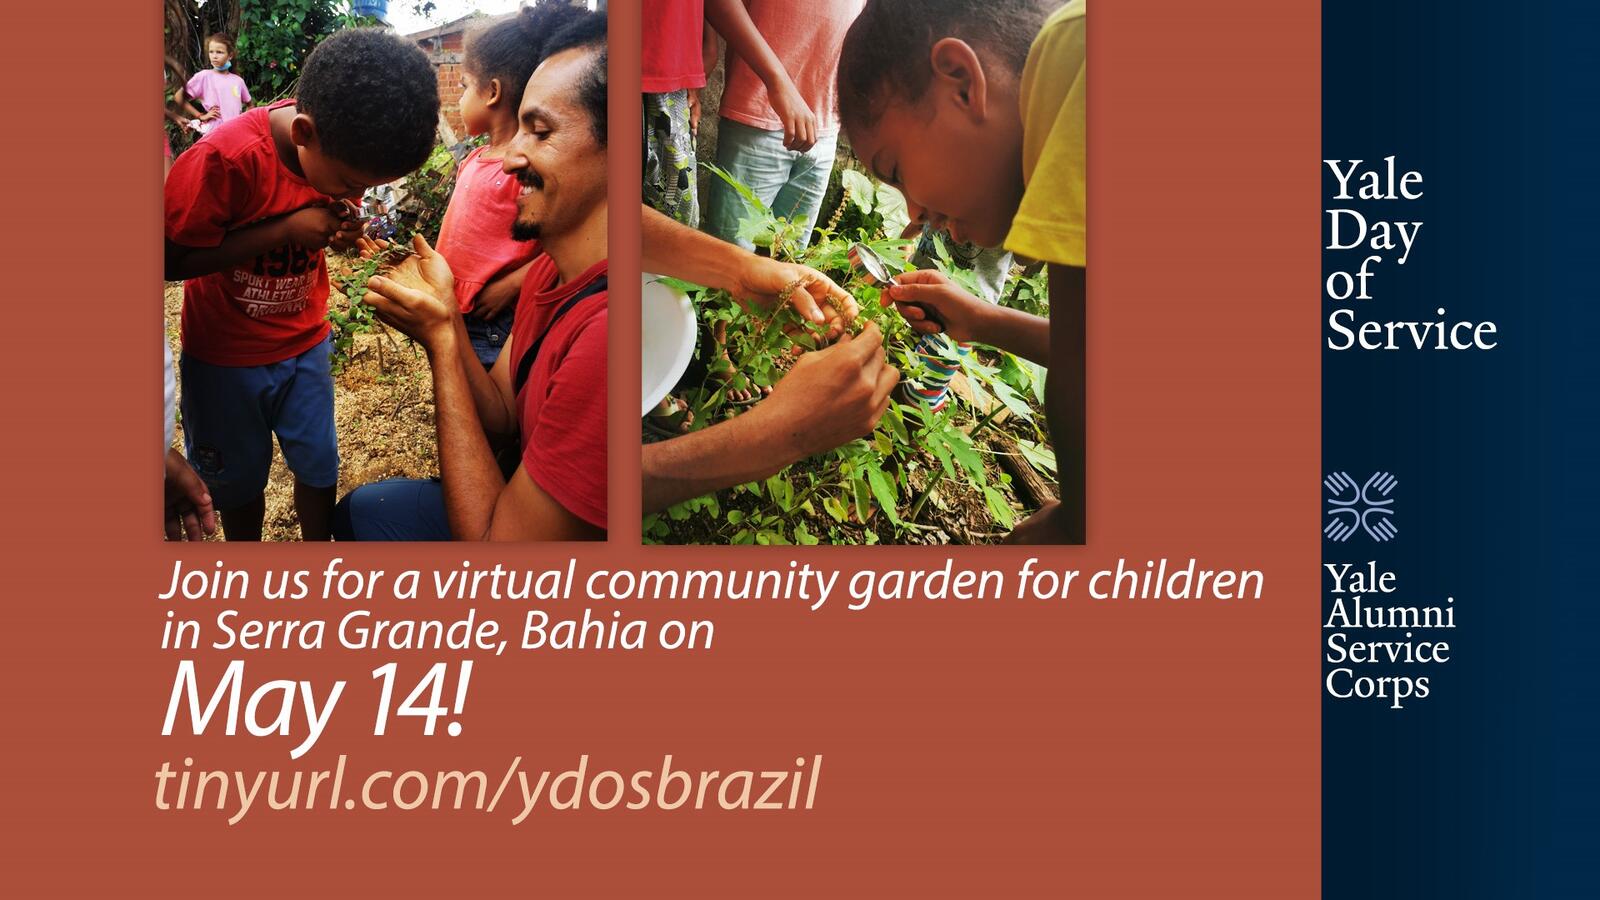 Graphic: Yale Day of Service: Virtual - Brazil Children's Garden, featuring a photo of a Latino man working in a garden with adolescent children